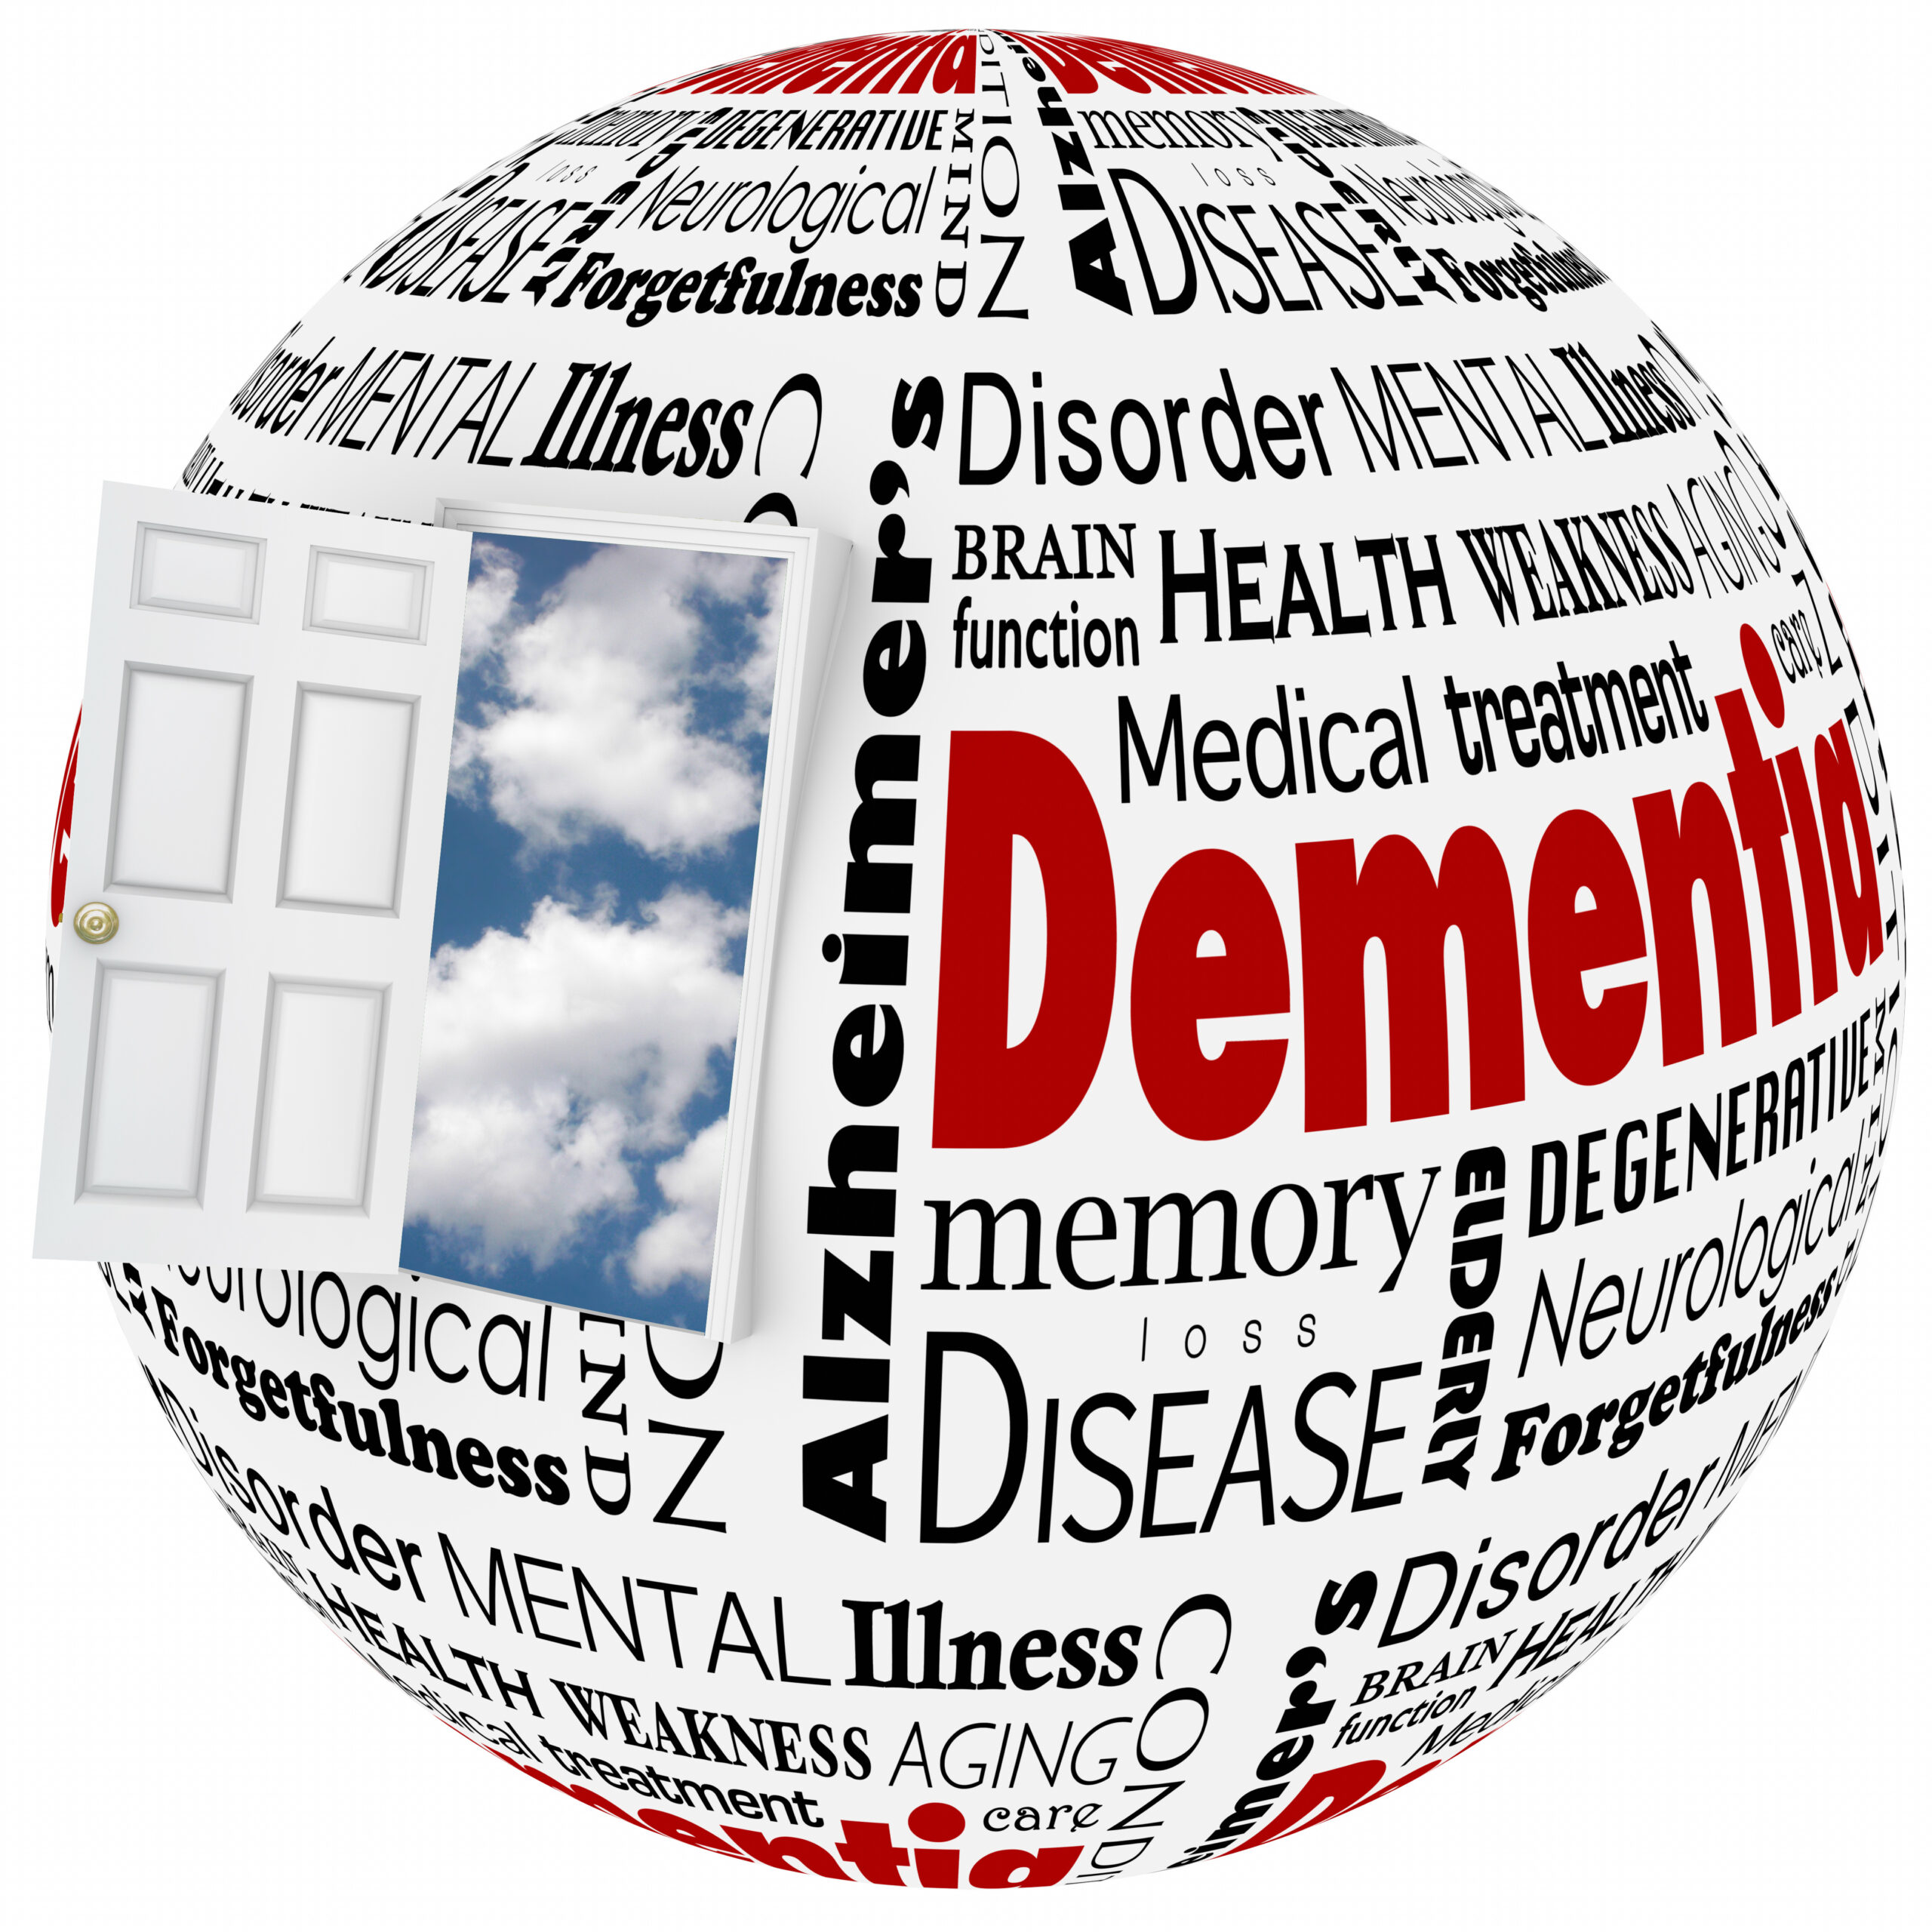 SEVEN HEALTHY HABITS LINKED TO LOWER RISK OF DEMENTIA IN THOSE WITH GENETIC RISK